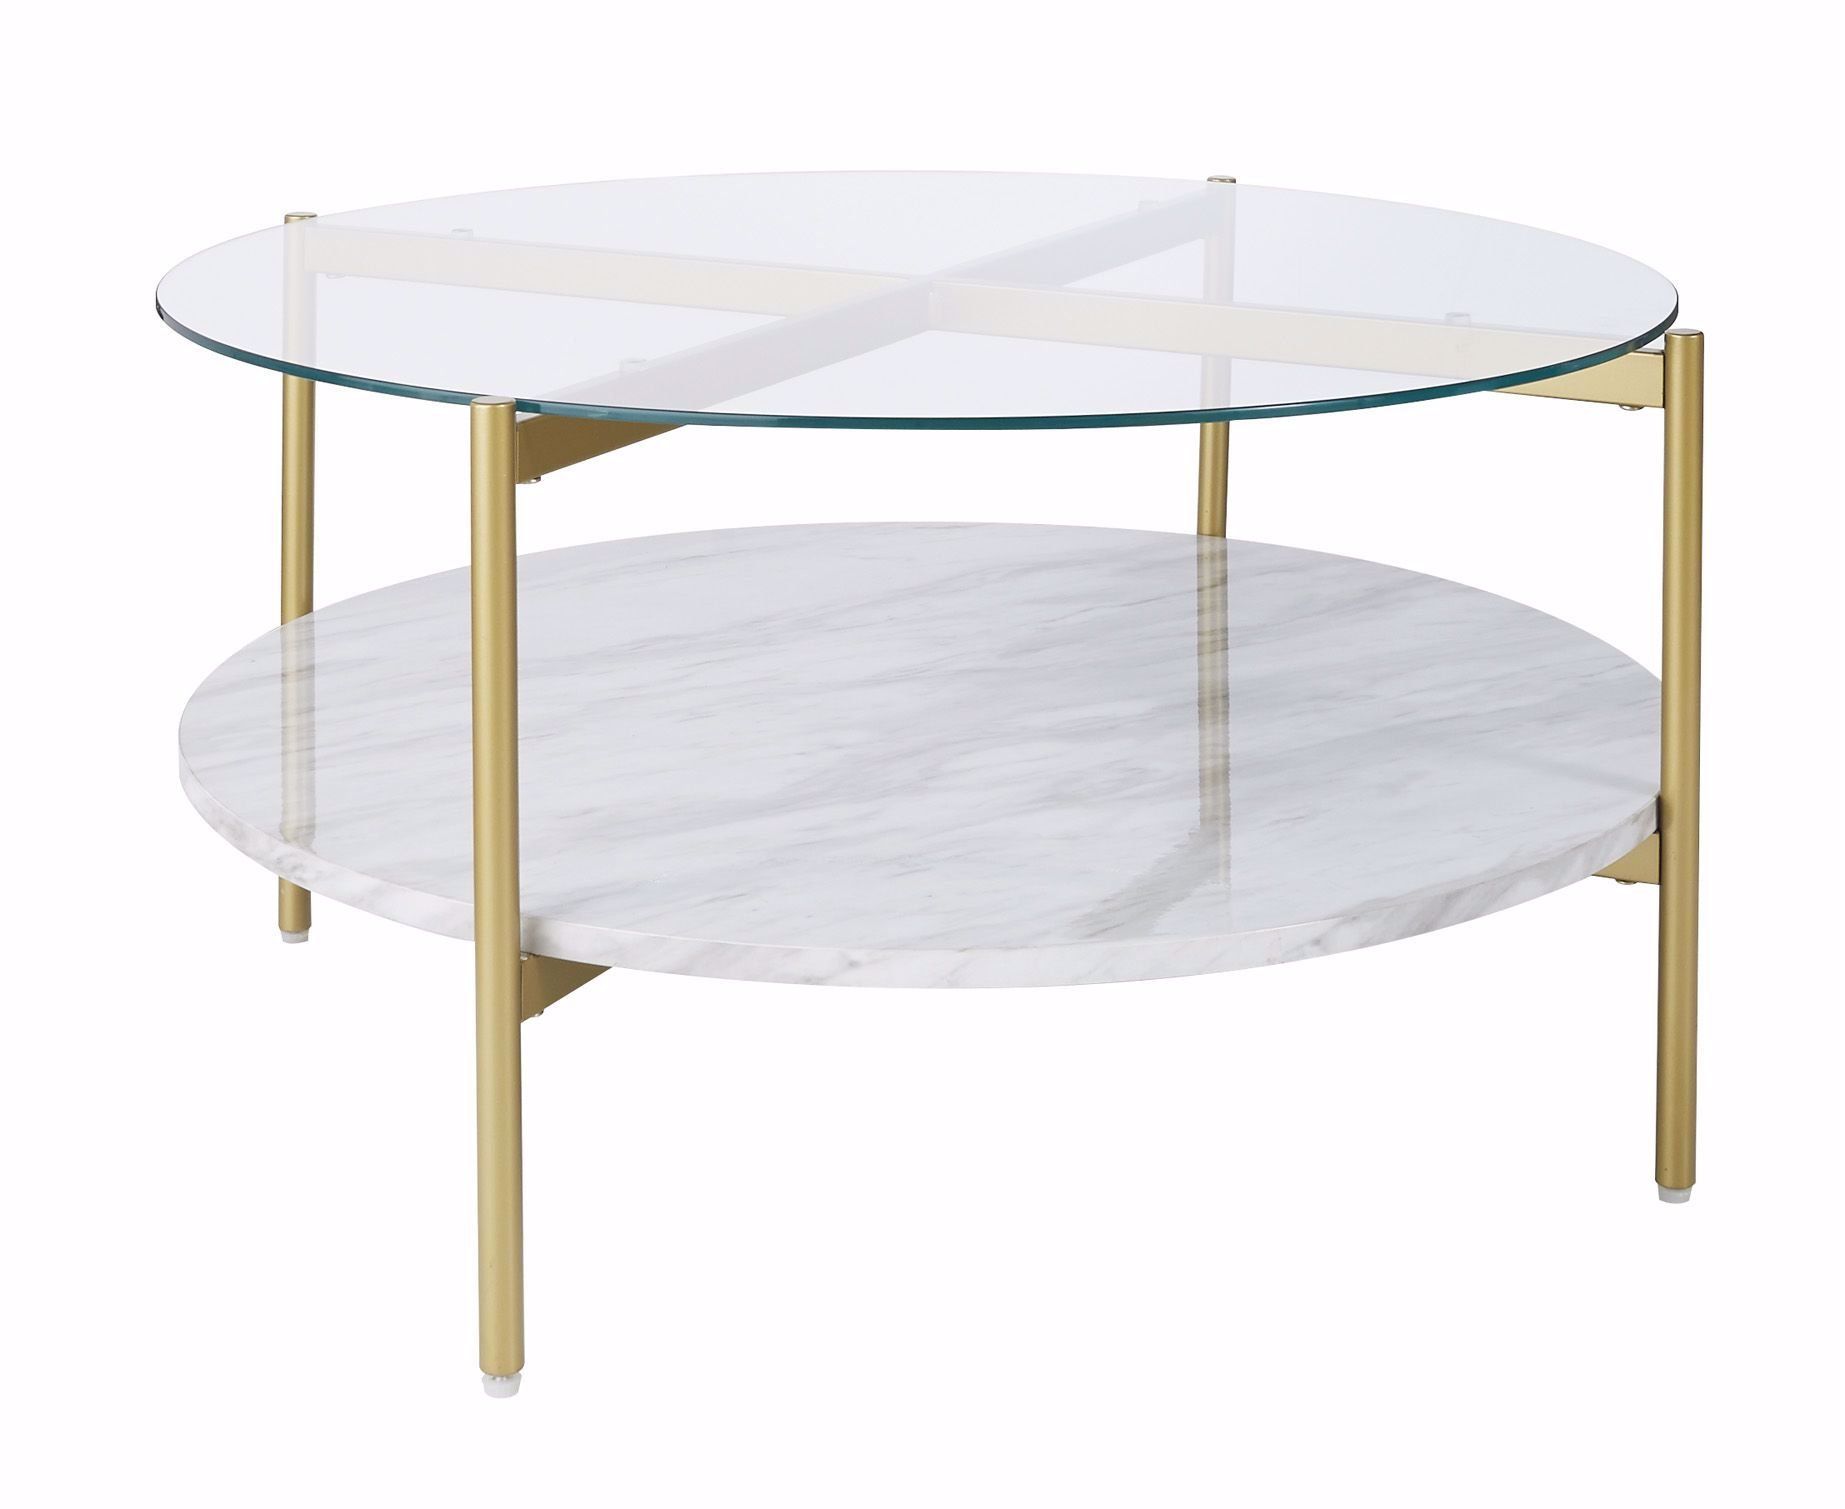 Wynora Cocktail Table